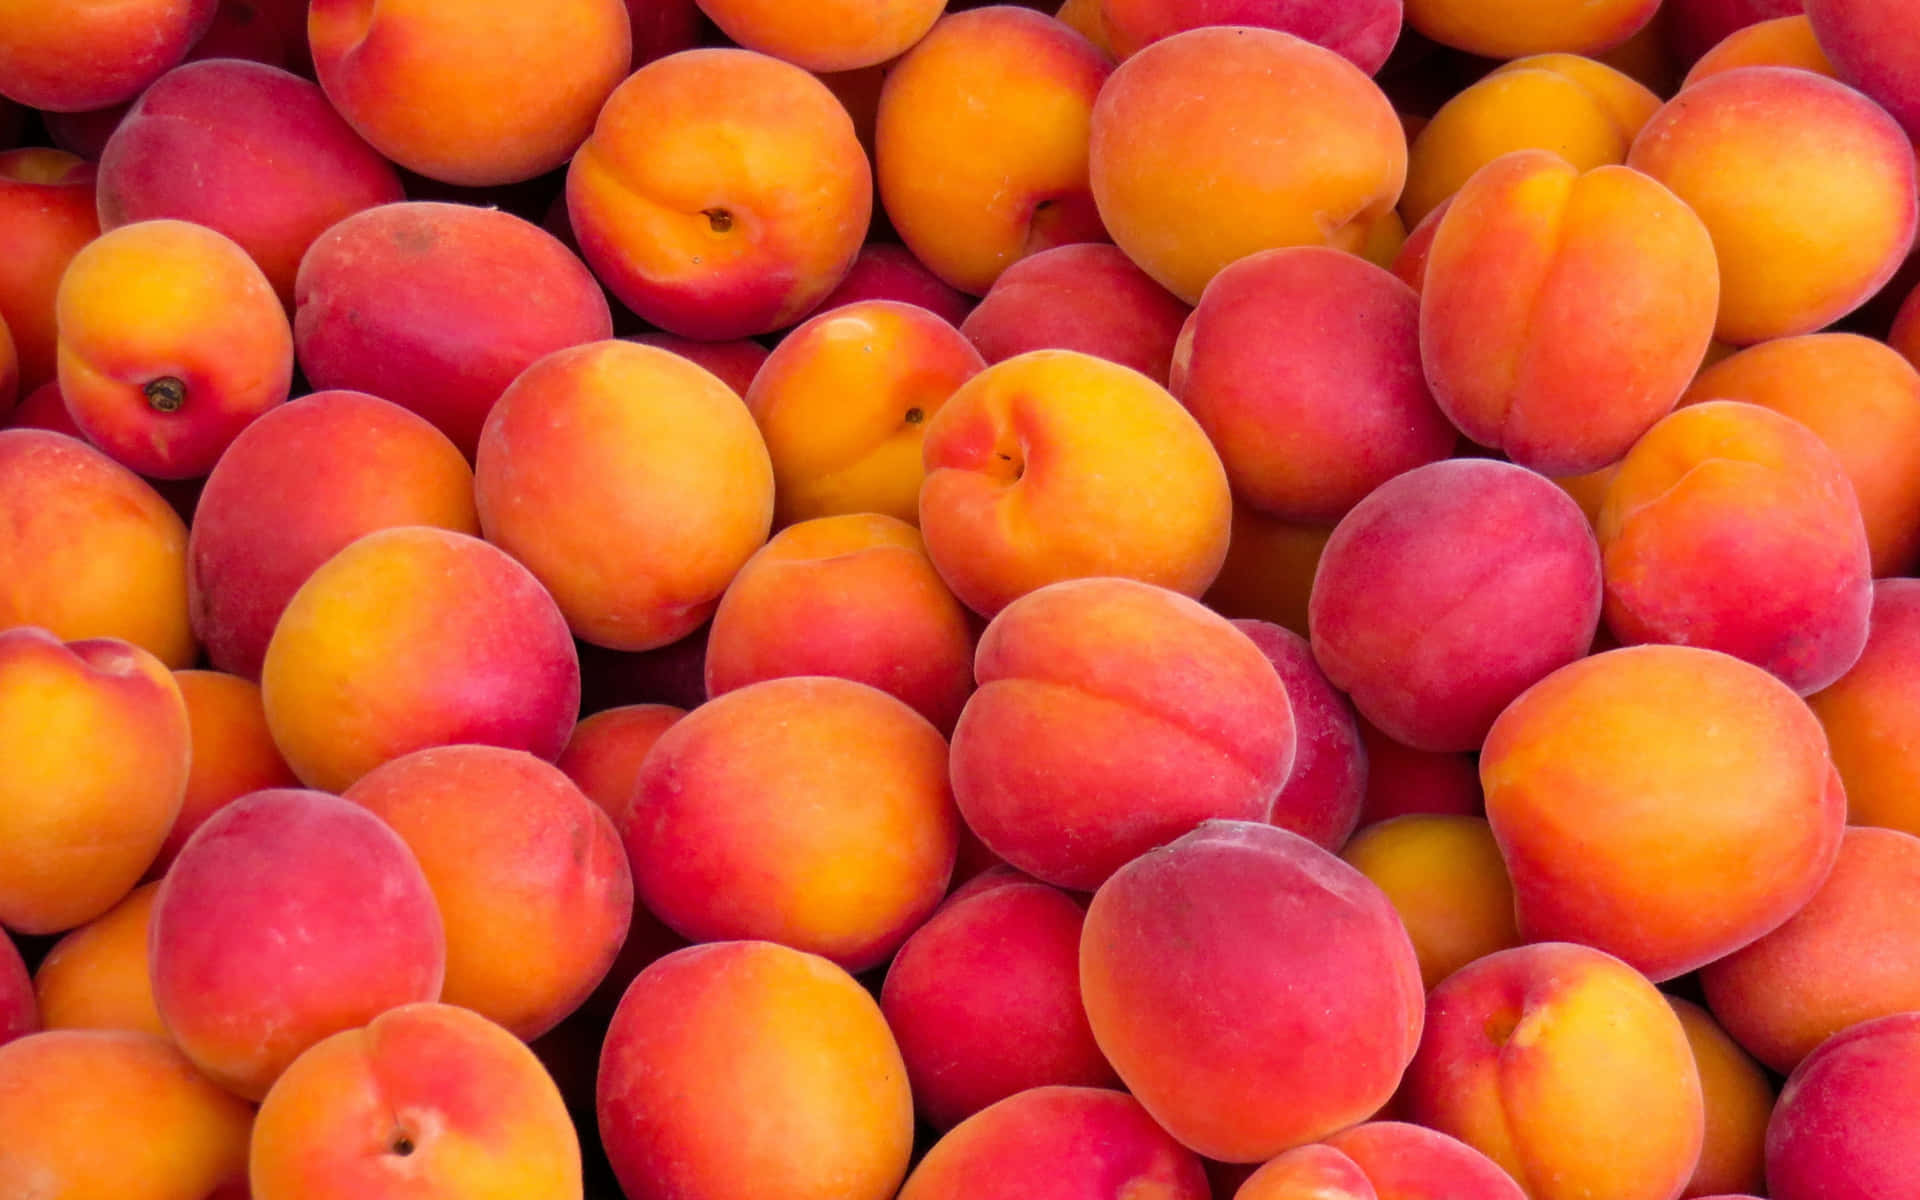 A single, ripe peach lay atop a wooden crate in a field.